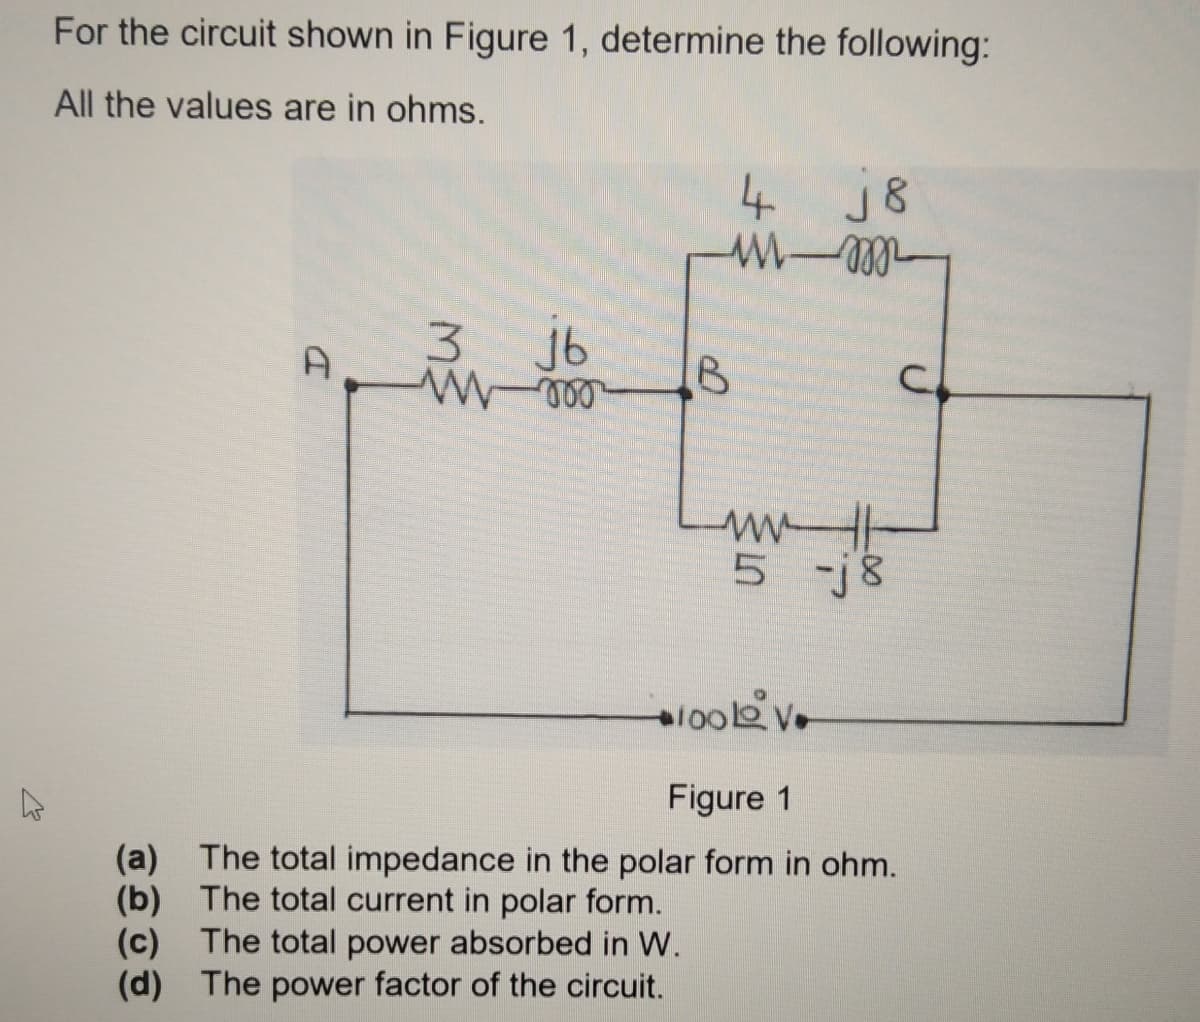 For the circuit shown in Figure 1, determine the following:
All the values are in ohms.
4 j8
3.
A
3 jb
5 -j8
Figure 1
(a) The total impedance in the polar form in ohm.
(b) The total current in polar form.
(c) The total power absorbed in W.
(d) The power factor of the circuit.
